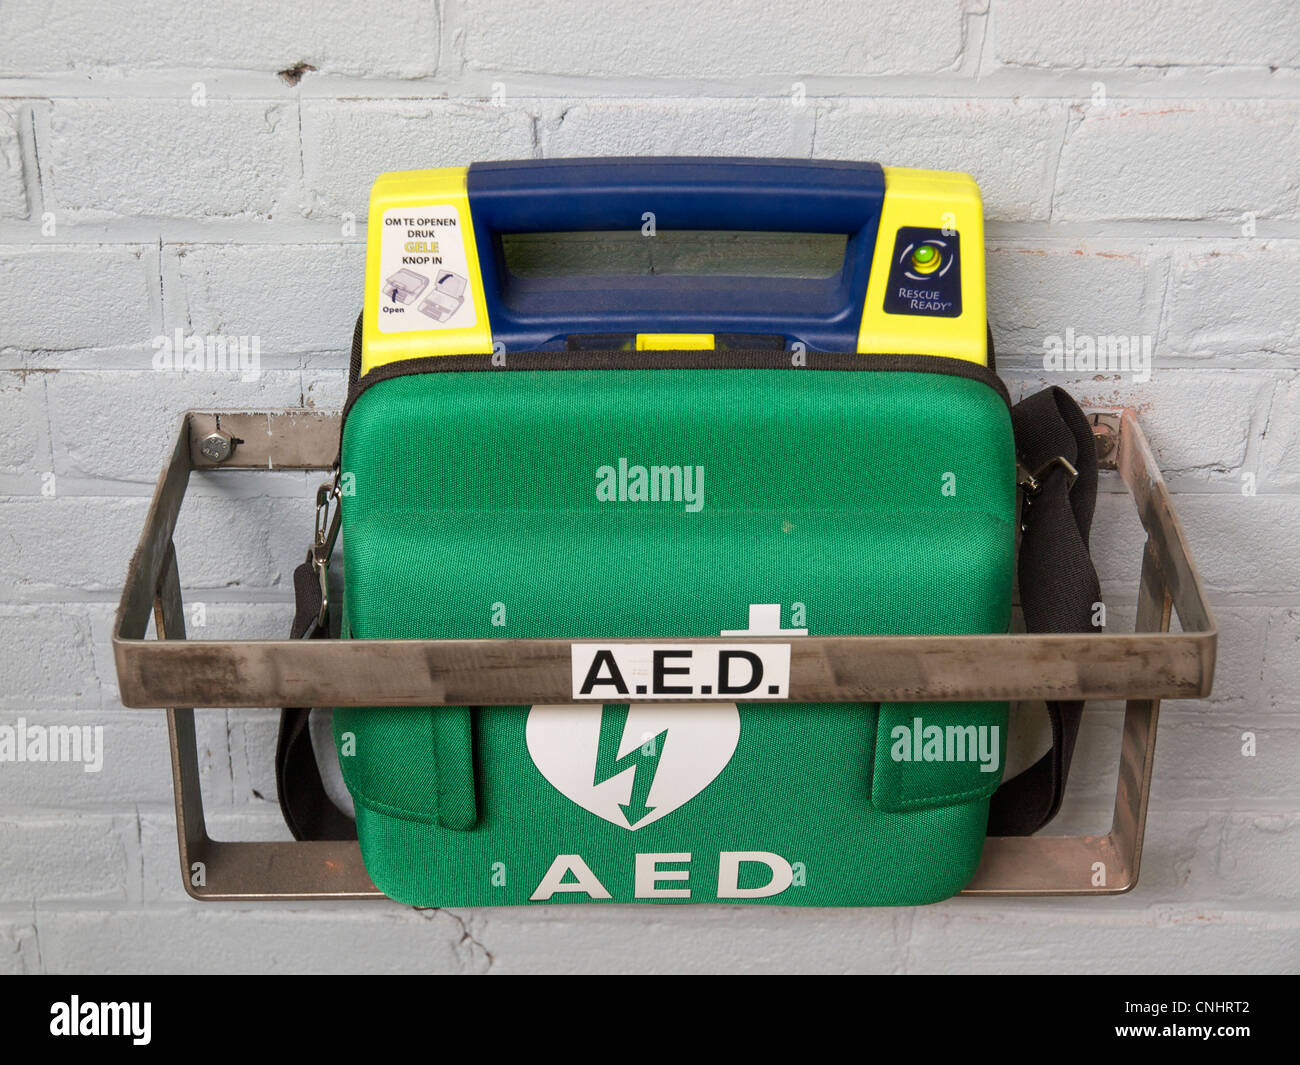 Emergency defibrillators cpr equipment can be found in many locations in the Netherlands Stock Photo